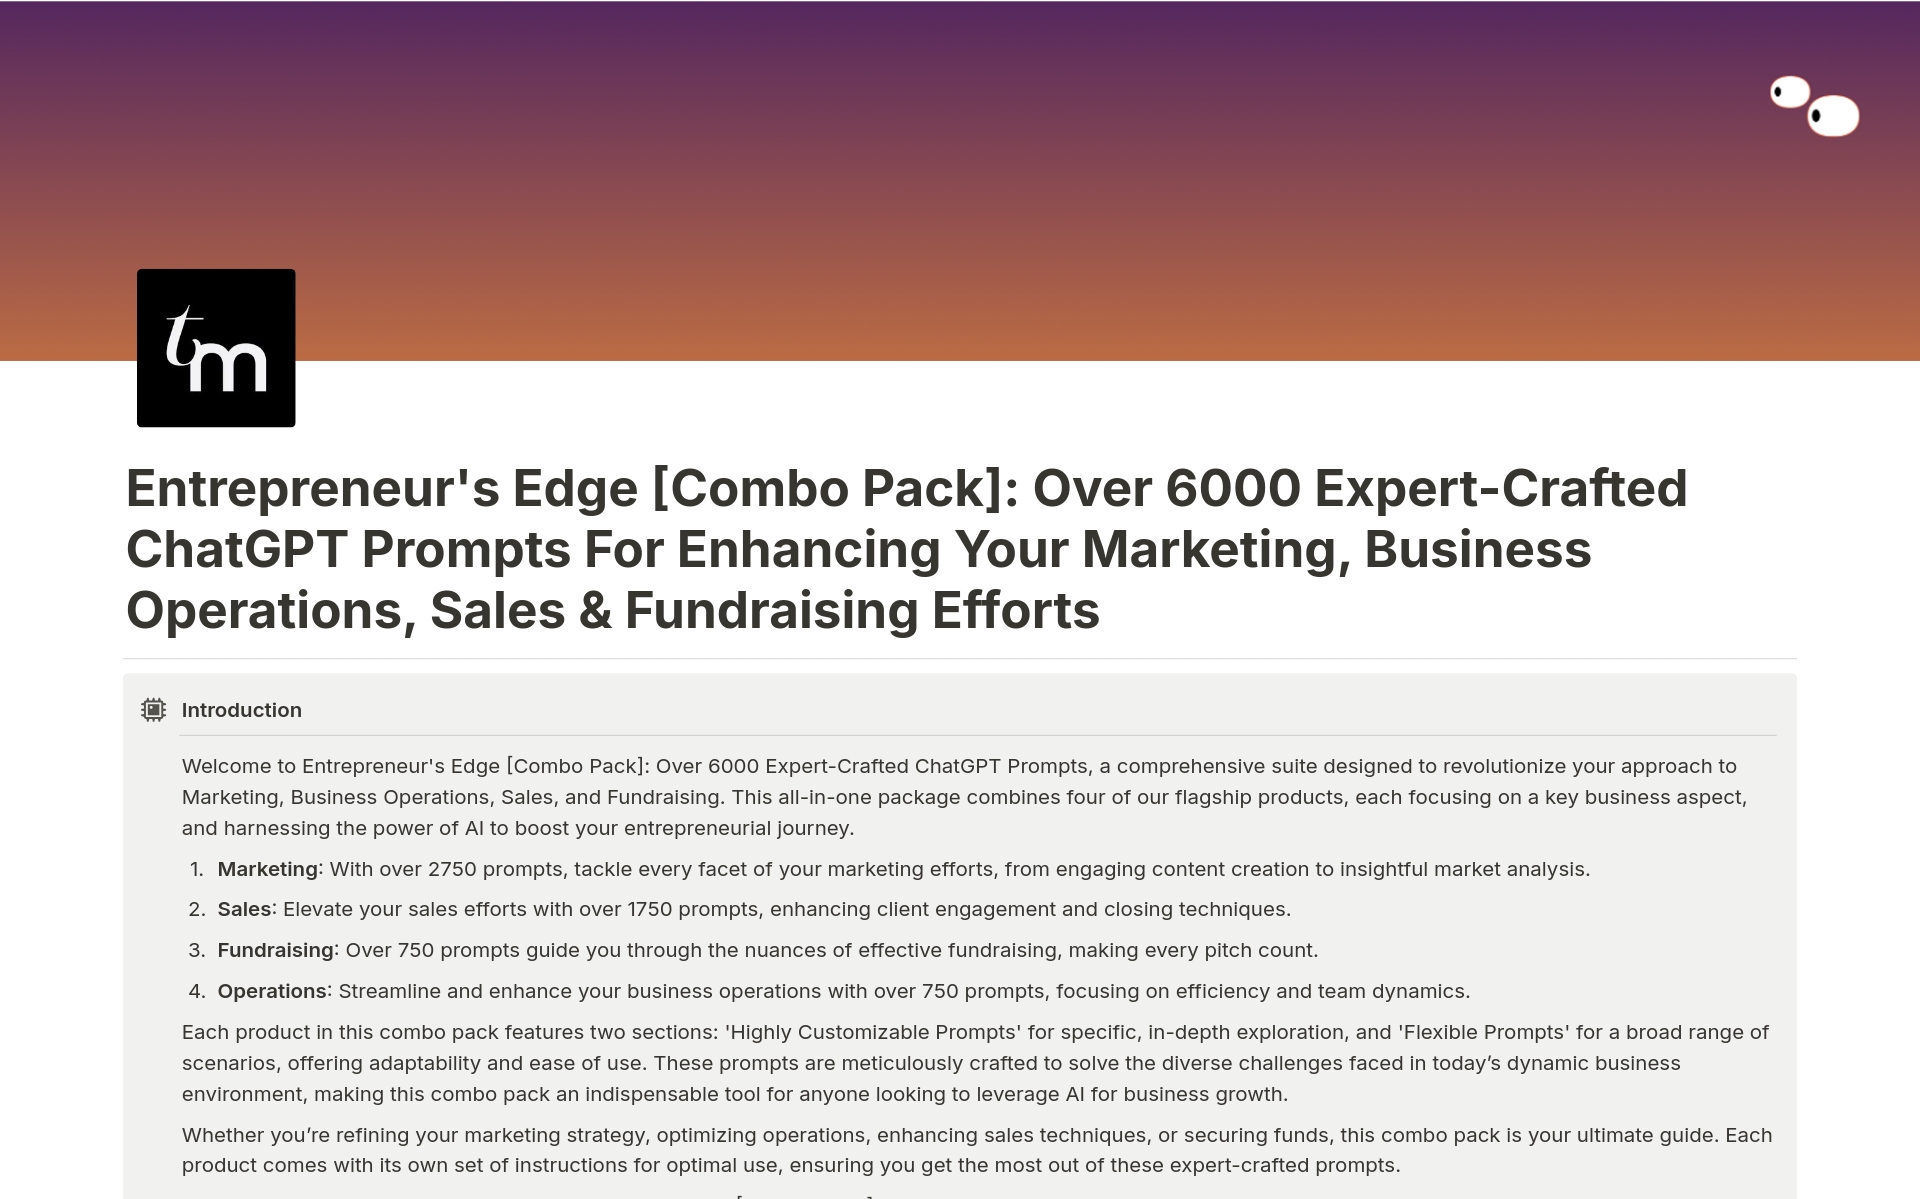 Get a robust compilation of over 6000 meticulously crafted ChatGPT prompts, purpose-built to support your entrepreneurial journey across marketing, operations, sales, and fundraising.